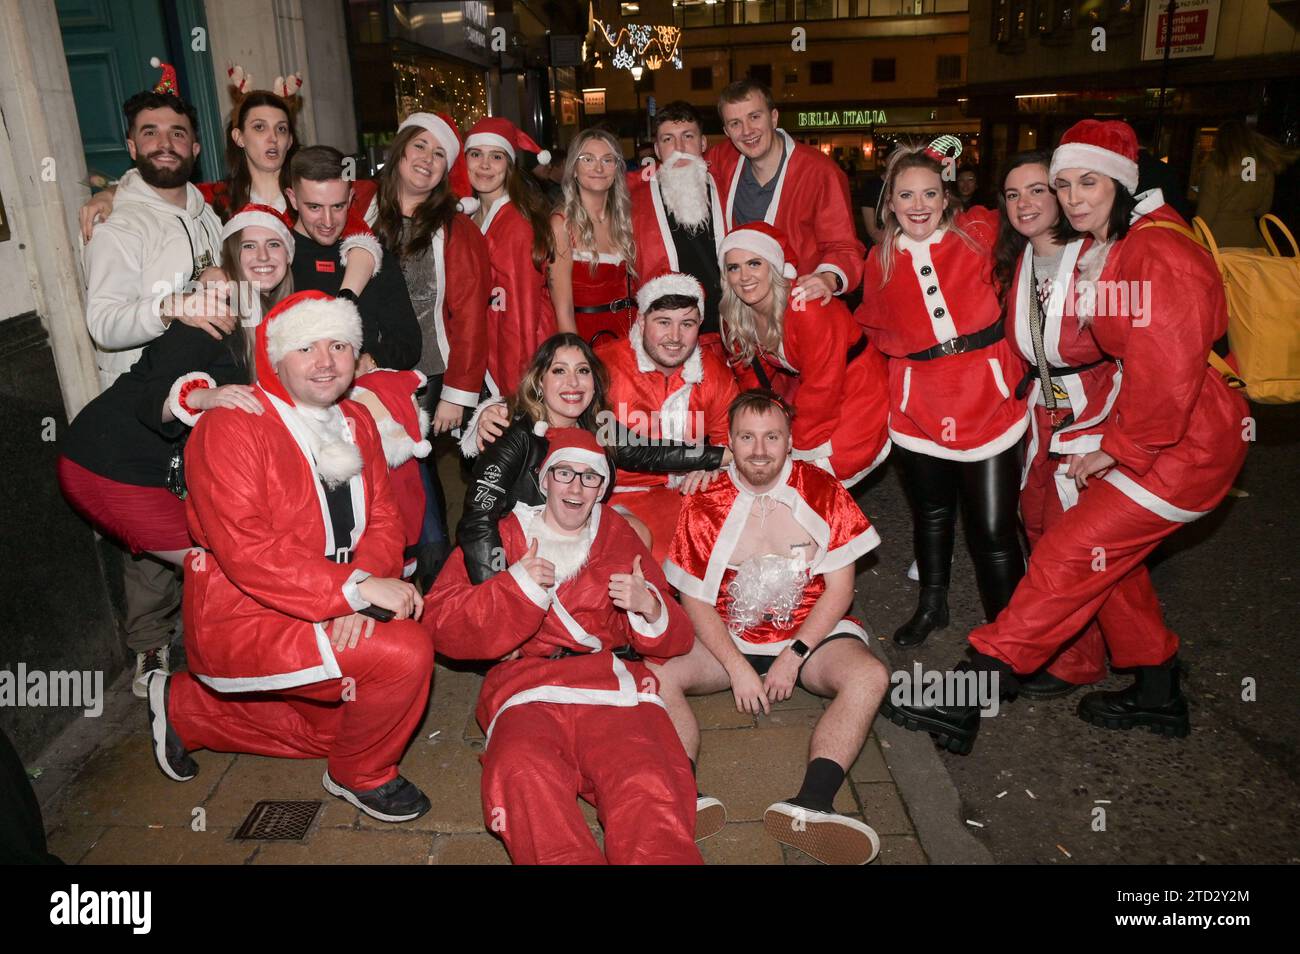 New Street, Birmingham 15th December 2023 - Revellers hit Birmingham’s infamous nightclub strip on Friday 15th December evening as they enjoyed the second-to-last Friday before Christmas. Several partygoers wore Christmas outfits and a work party full of Santas posed for a group photo before making their way to another pub. Friends were carrying each other along the Broad Street nightlife area as the evening turned into morning. Others were seen in smart wear after attending city centre festive galas. Plenty of people showed off their Christmas Jumpers as they enjoyed mild temperatures. The ni Stock Photo